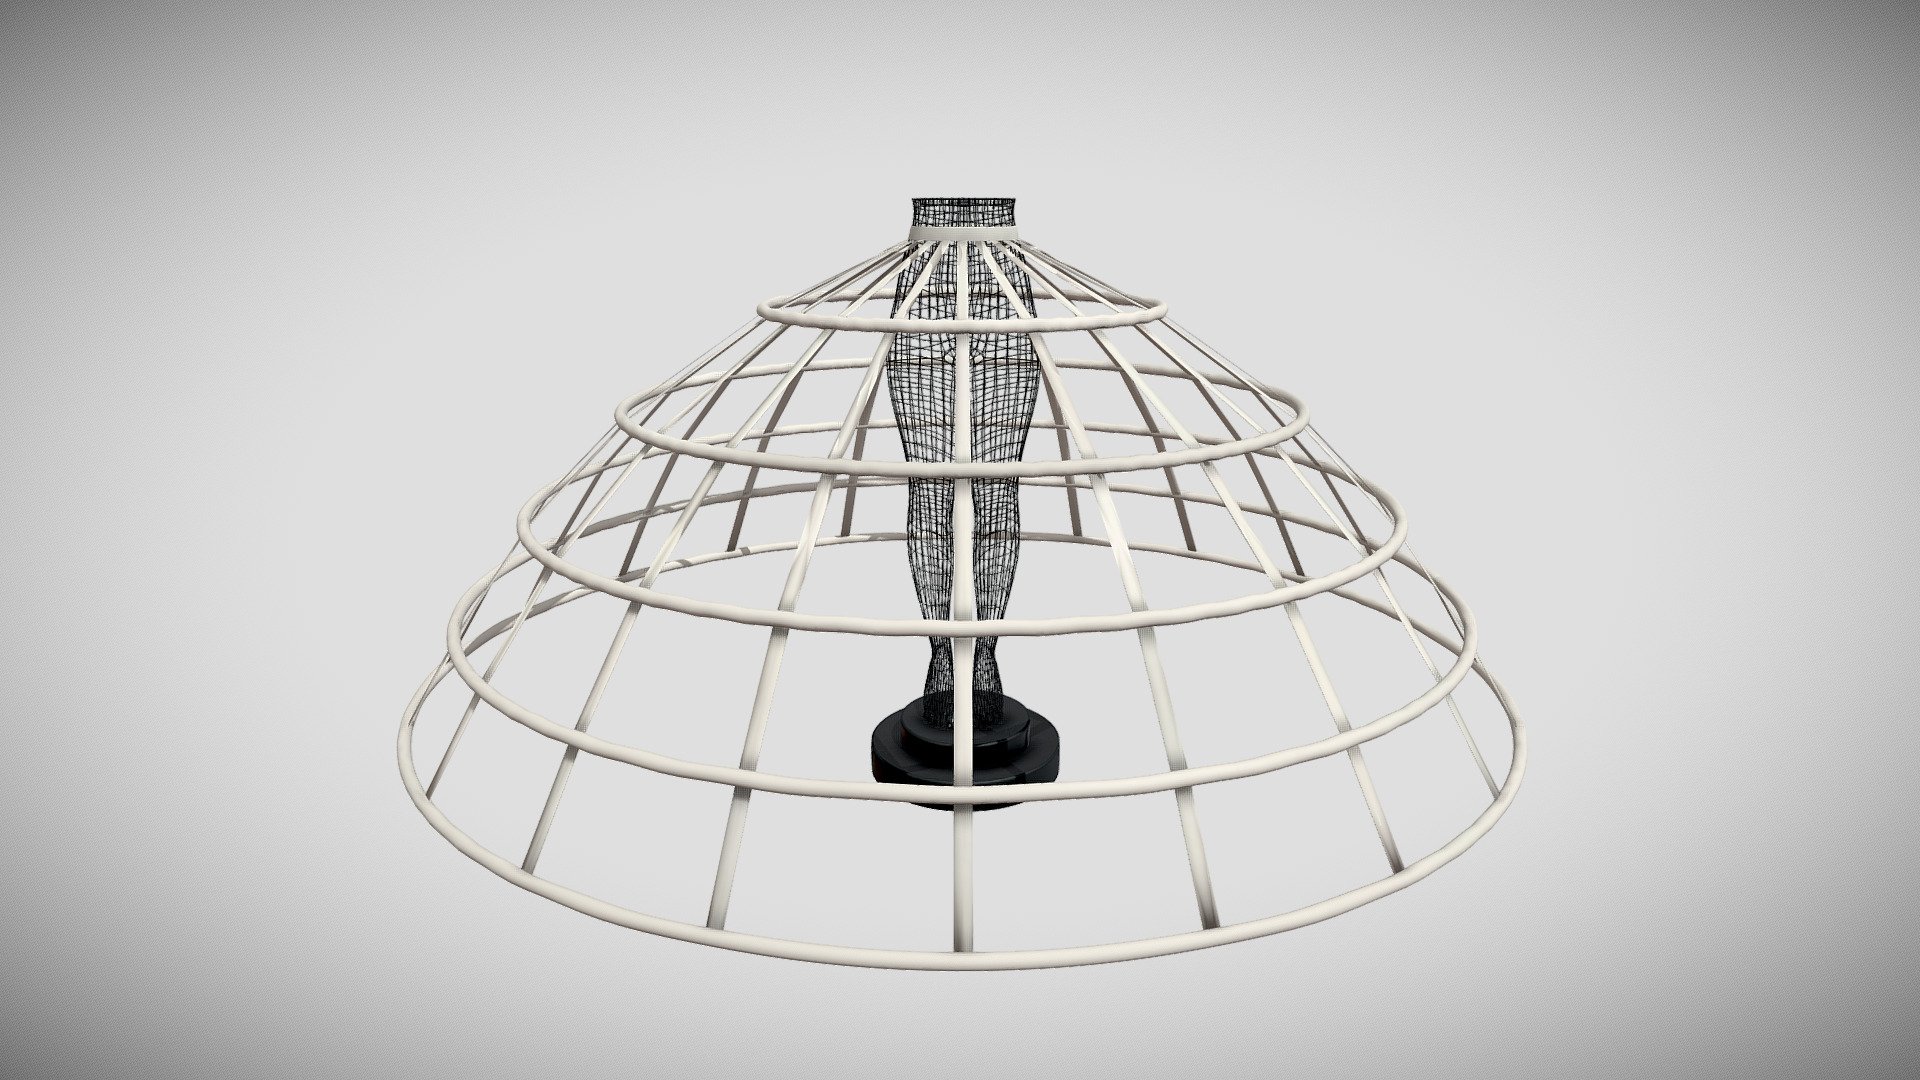 The 3D model presents a digital reconstruction of a historical crinoline - a special framework used to expand the fullness of the skirt in the mid 19th century. The crinoline is presented in a historical photograph (https://spreekbeurten.info/mode12.jpg). It has 5 hoops and 20 ribbons. A new method of parameterisation was applied to reproduce the shape and construction of the hoops, ribbons and belt (for further details see https://doi.org/10.1080/00405000.2019.1621042). The authors of the 3D model are

Aleksei Moskvin https://independent.academia.edu/AlekseiMoskvin

Mariia Moskvina https://independent.academia.edu/MariiaMoskvina

(Saint Petersburg State University of Industrial Technologies and Design)

DOI: http://dx.doi.org/10.13140/RG.2.2.33543.73125

The authors thank Prof. Victor Kuzmichev from Ivanovo State Polytechnic University for his important contribution to this reconstruction 3d model